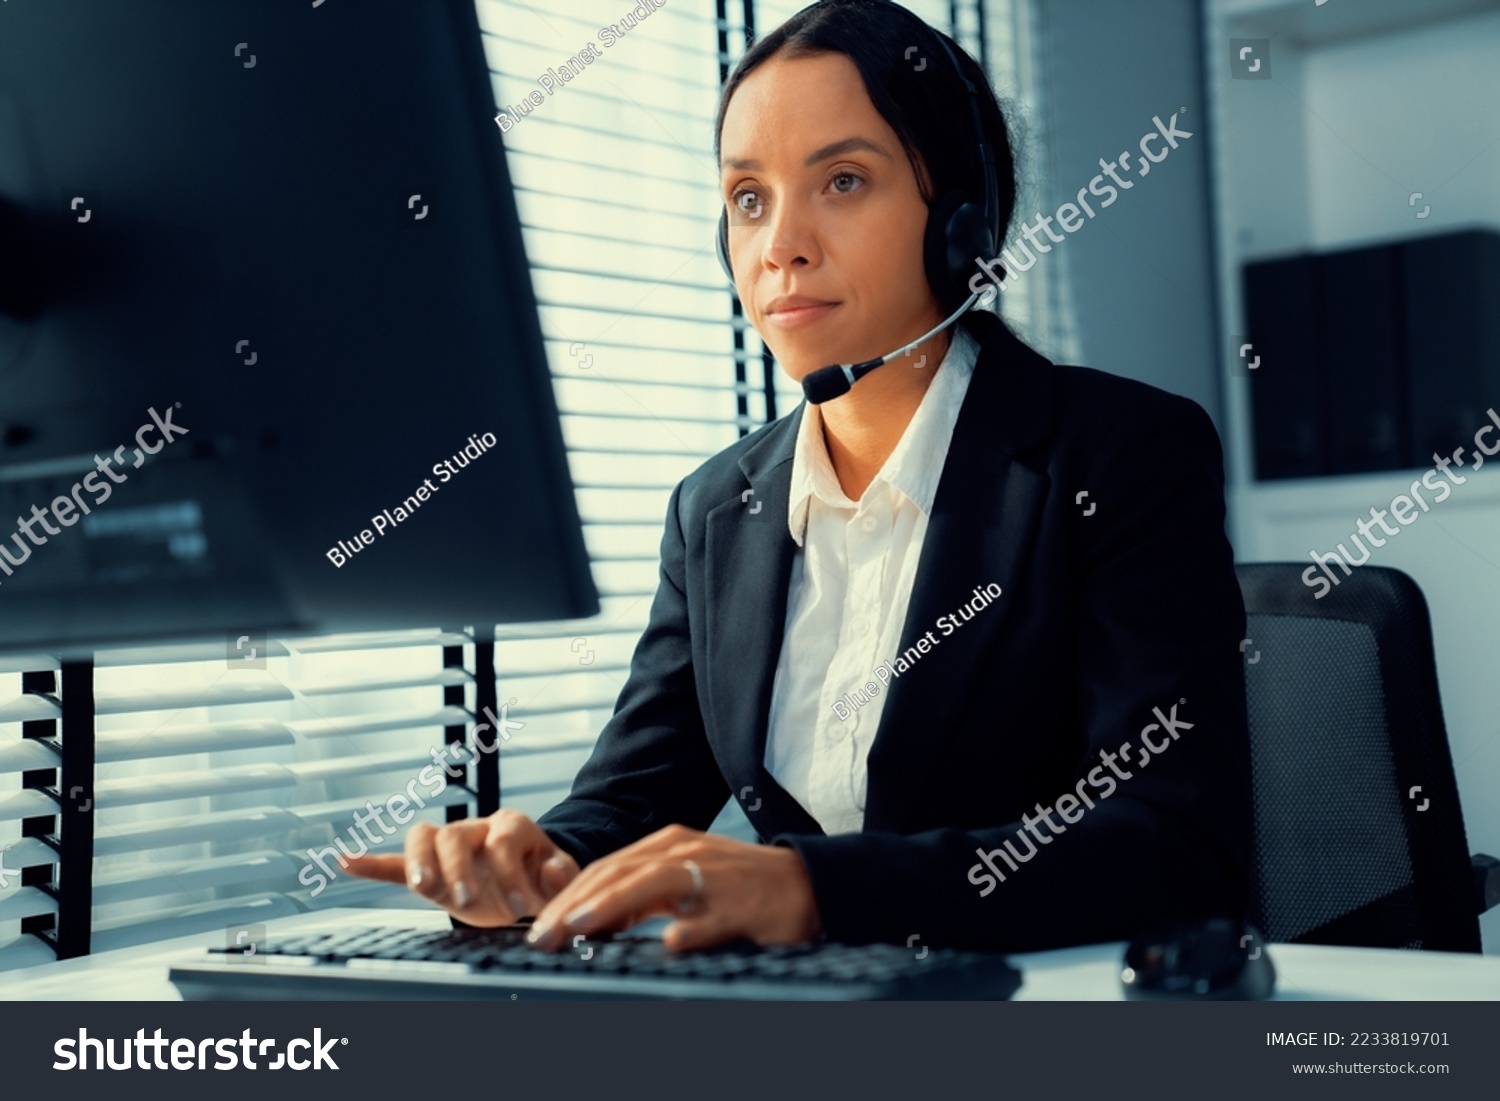 Competent female operator working on computer and talking with clients. Concept relevant to both call centers and customer service offices. #2233819701